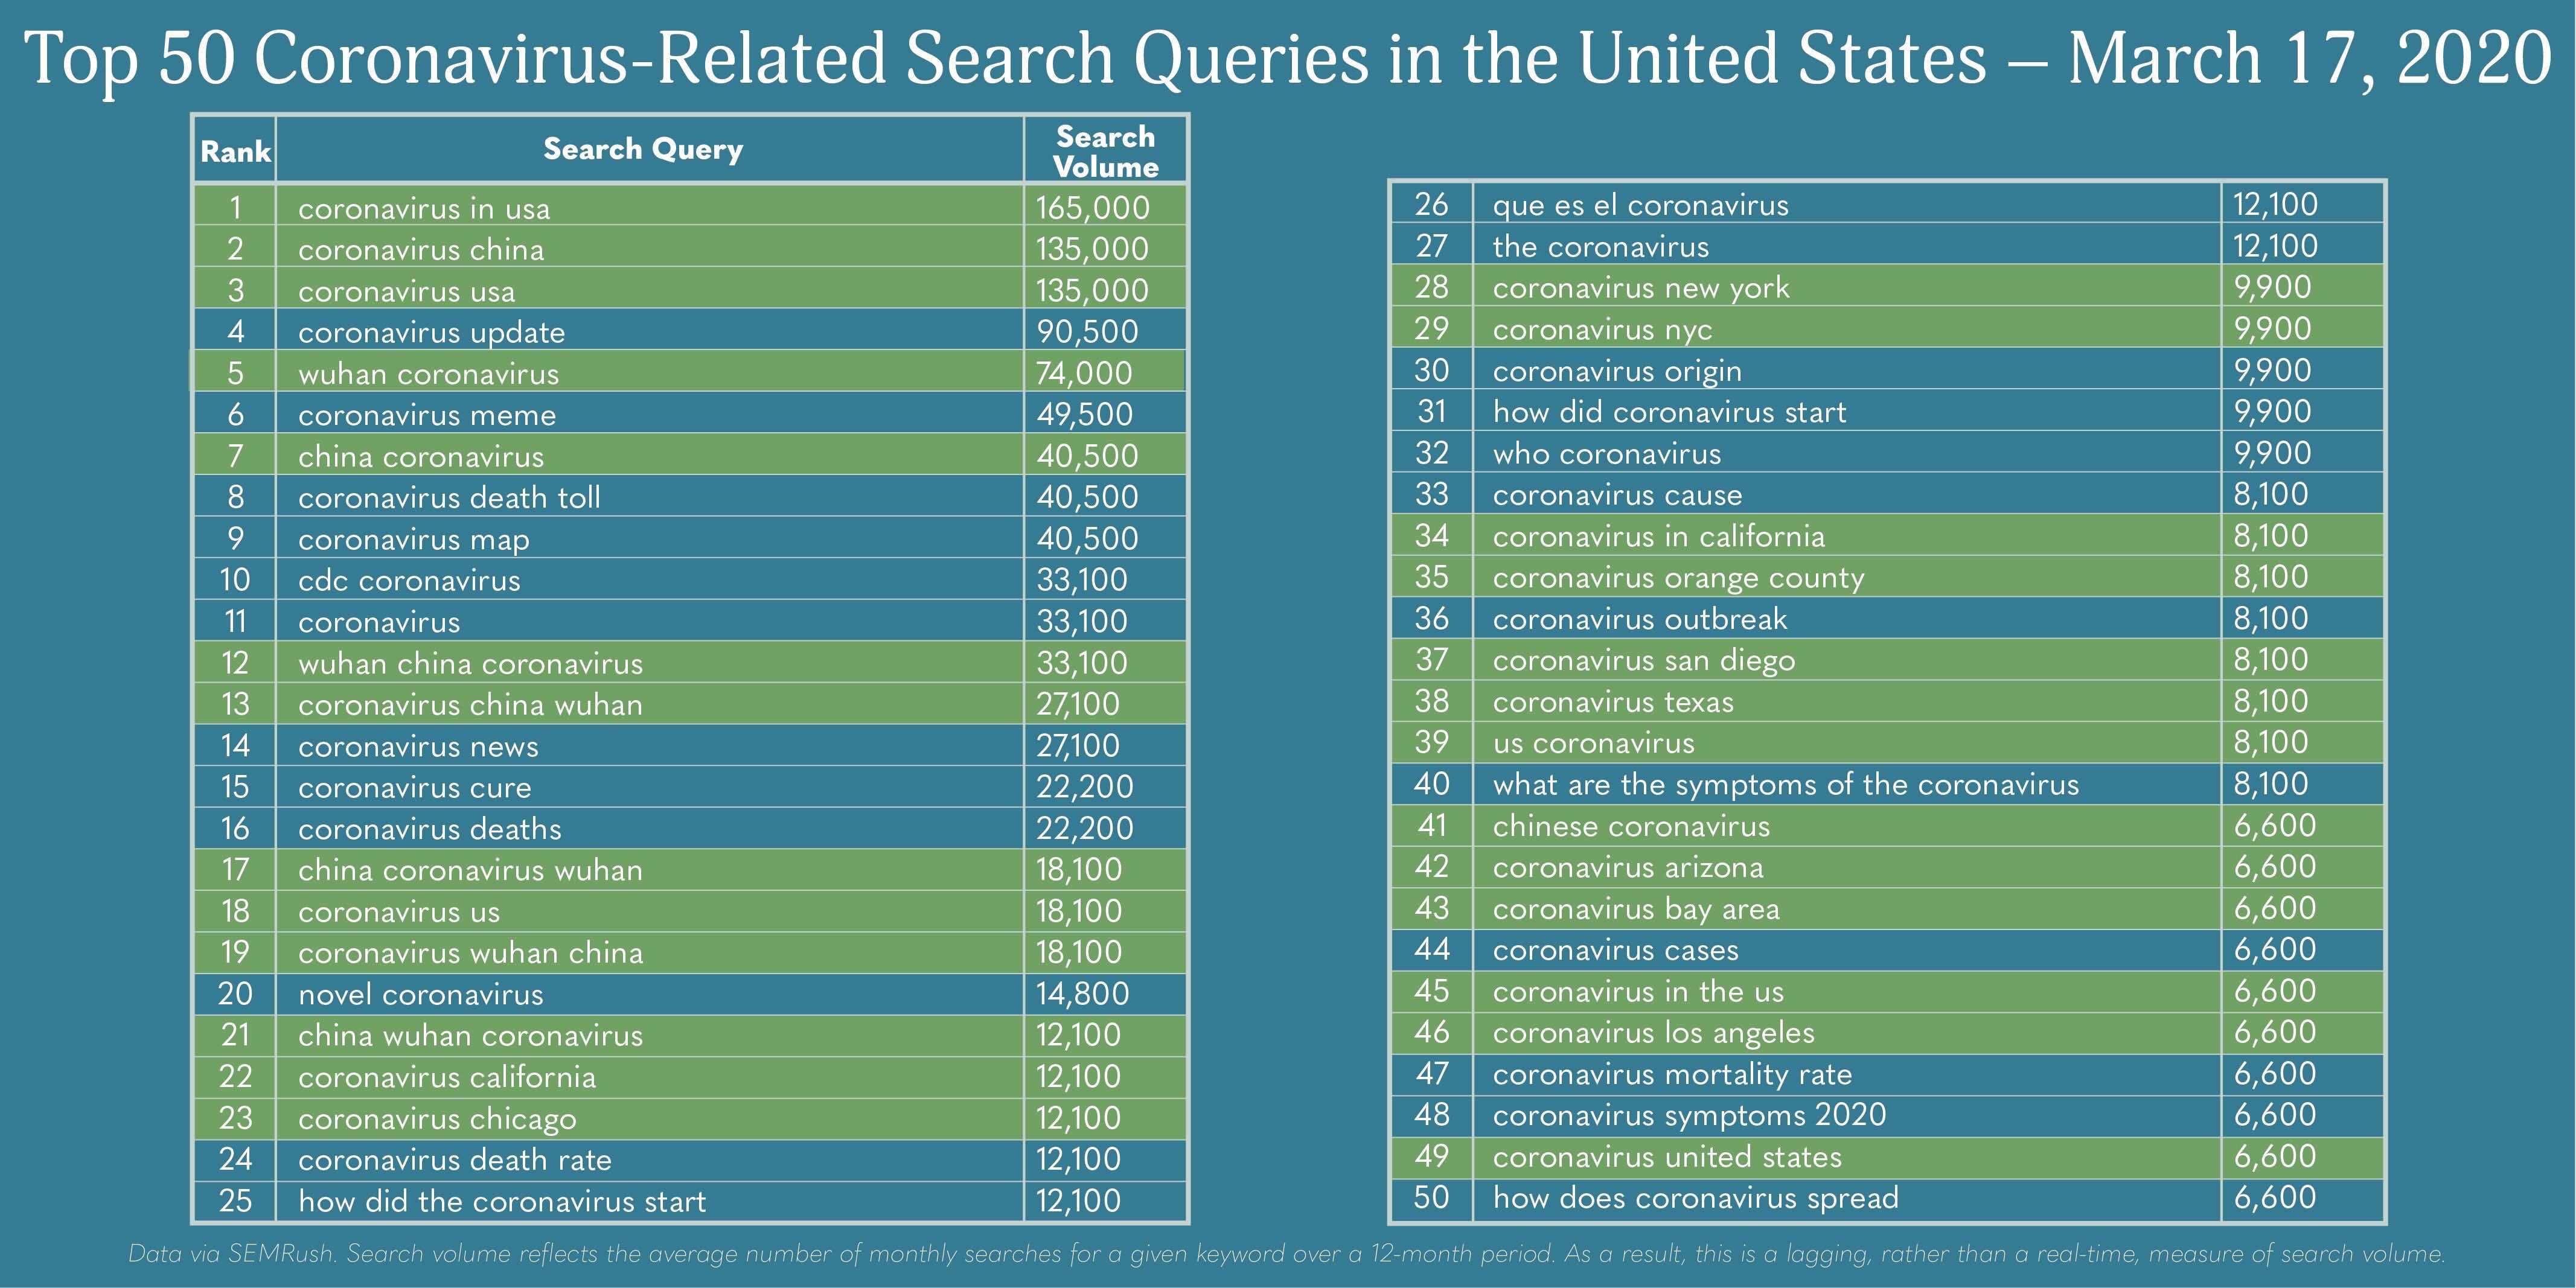 coronavirus-related search queries from march 17